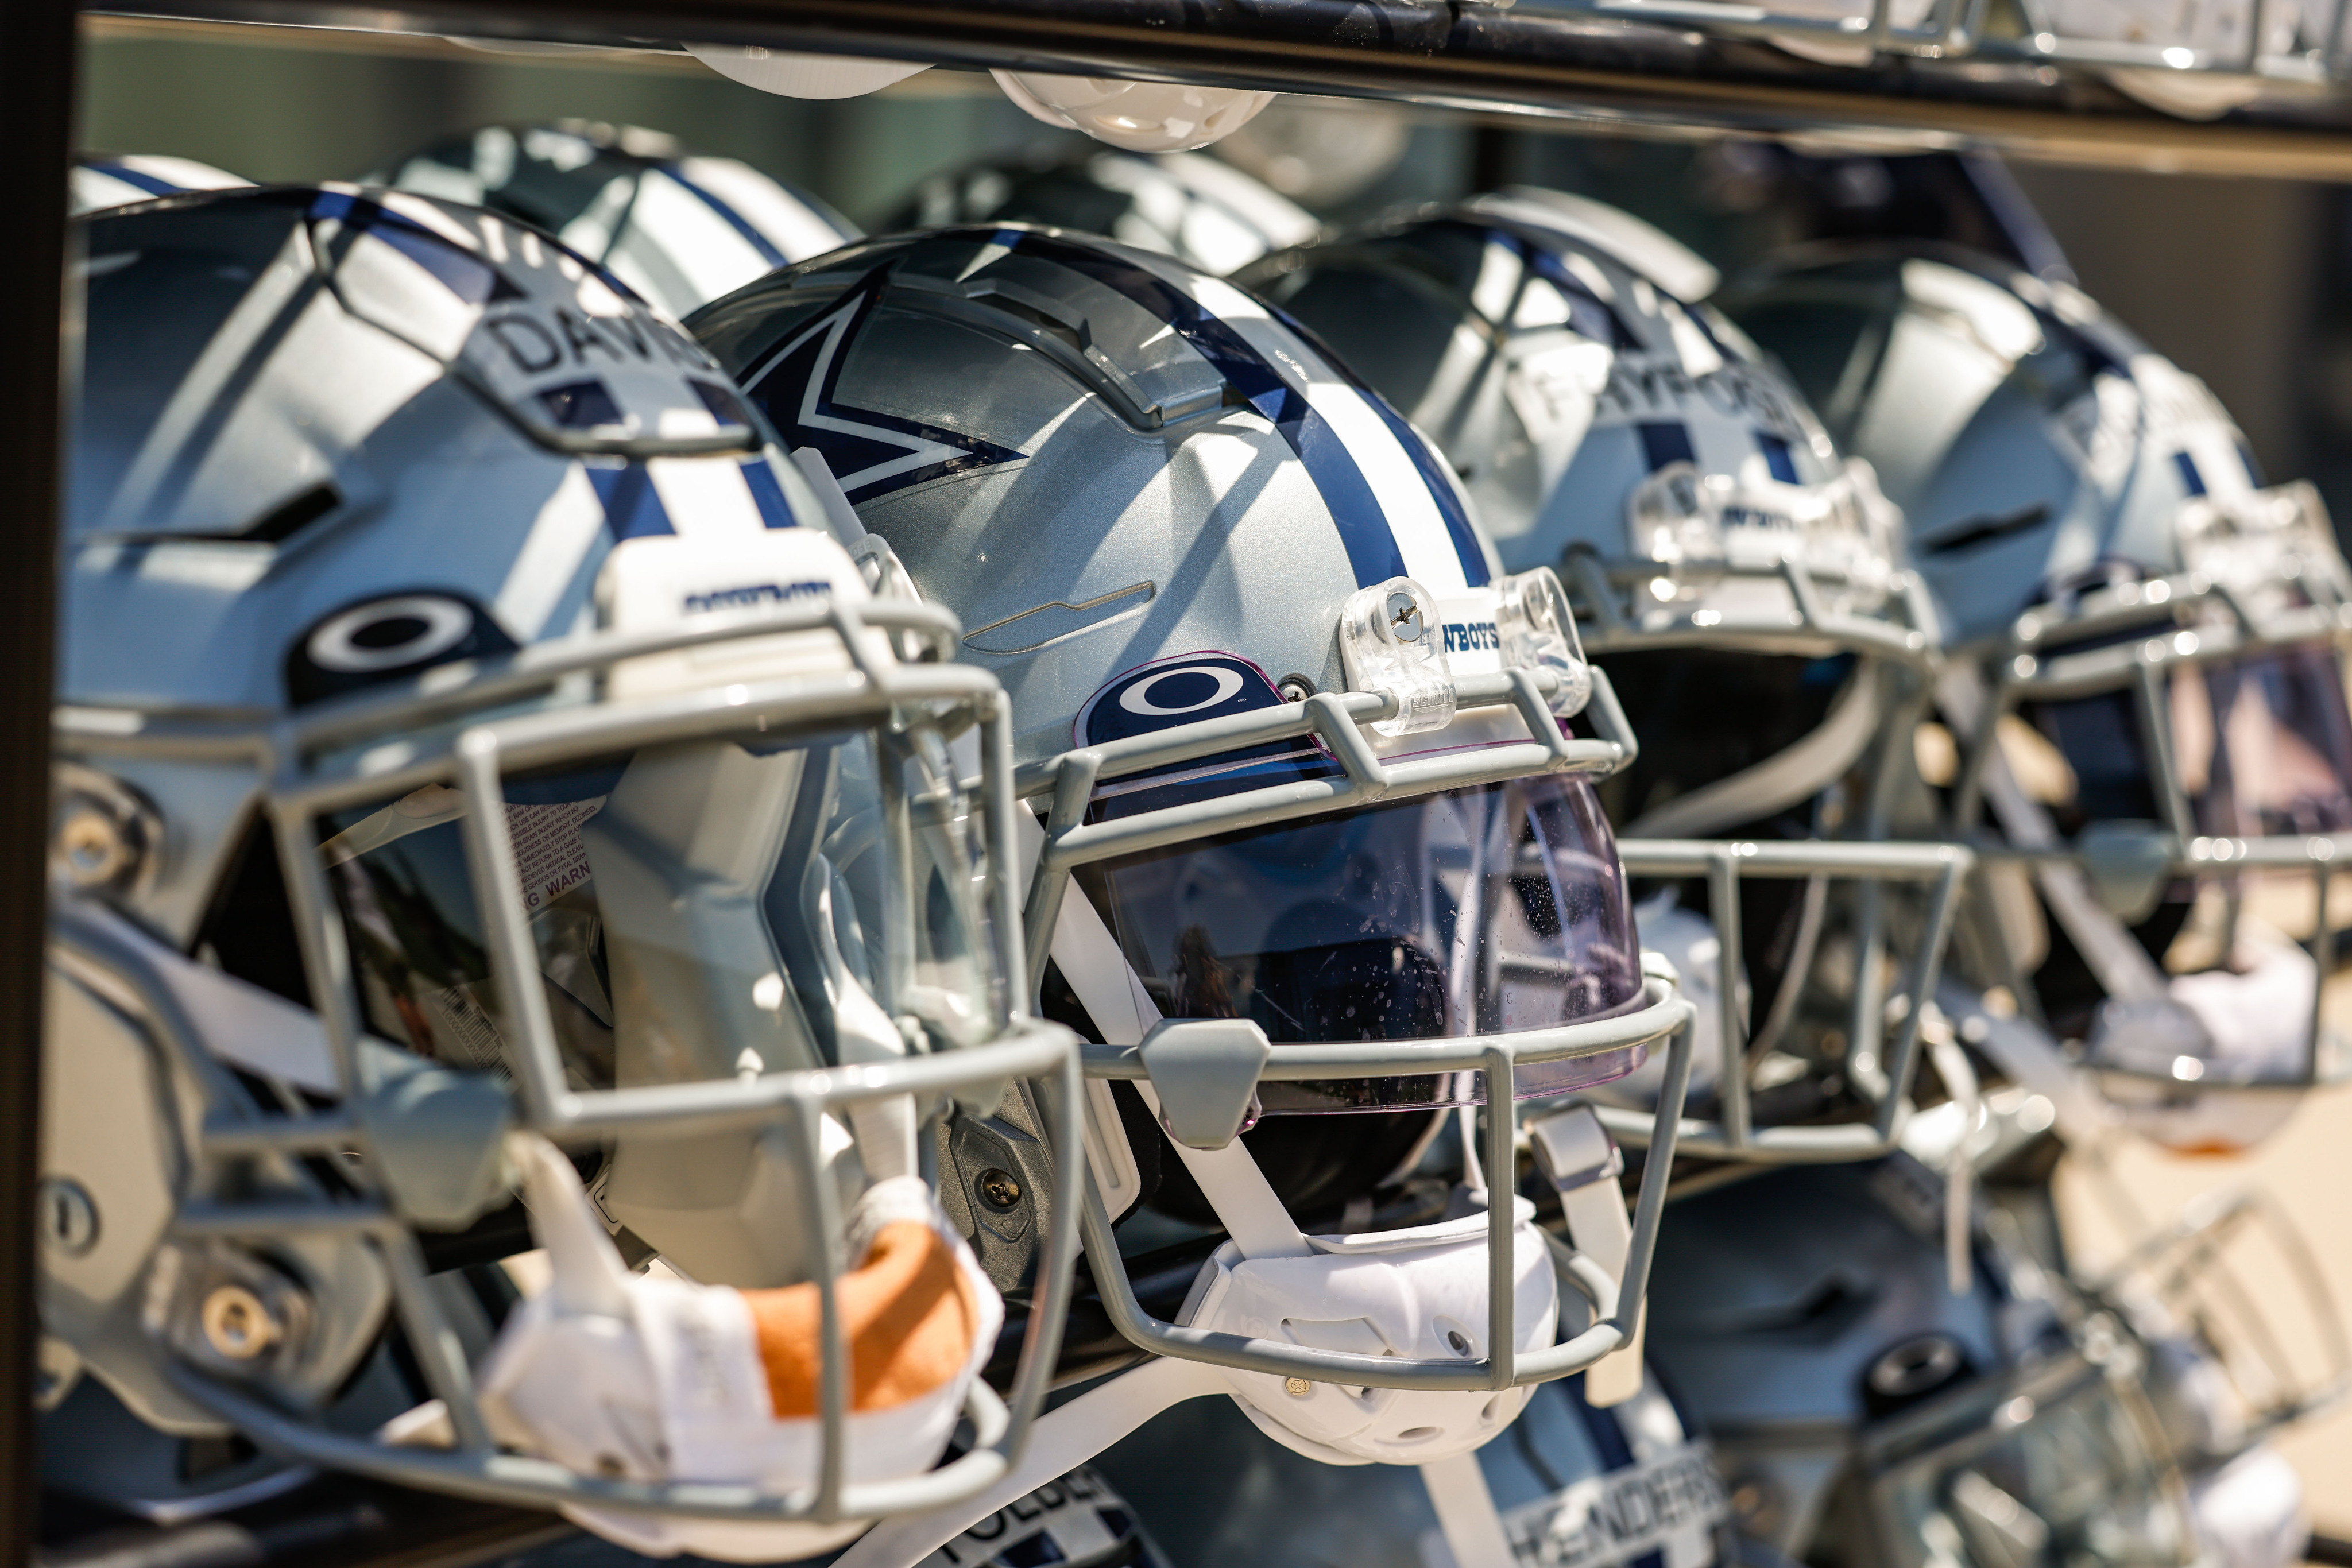 5 things we learned during Dallas Cowboys rookie minicamp